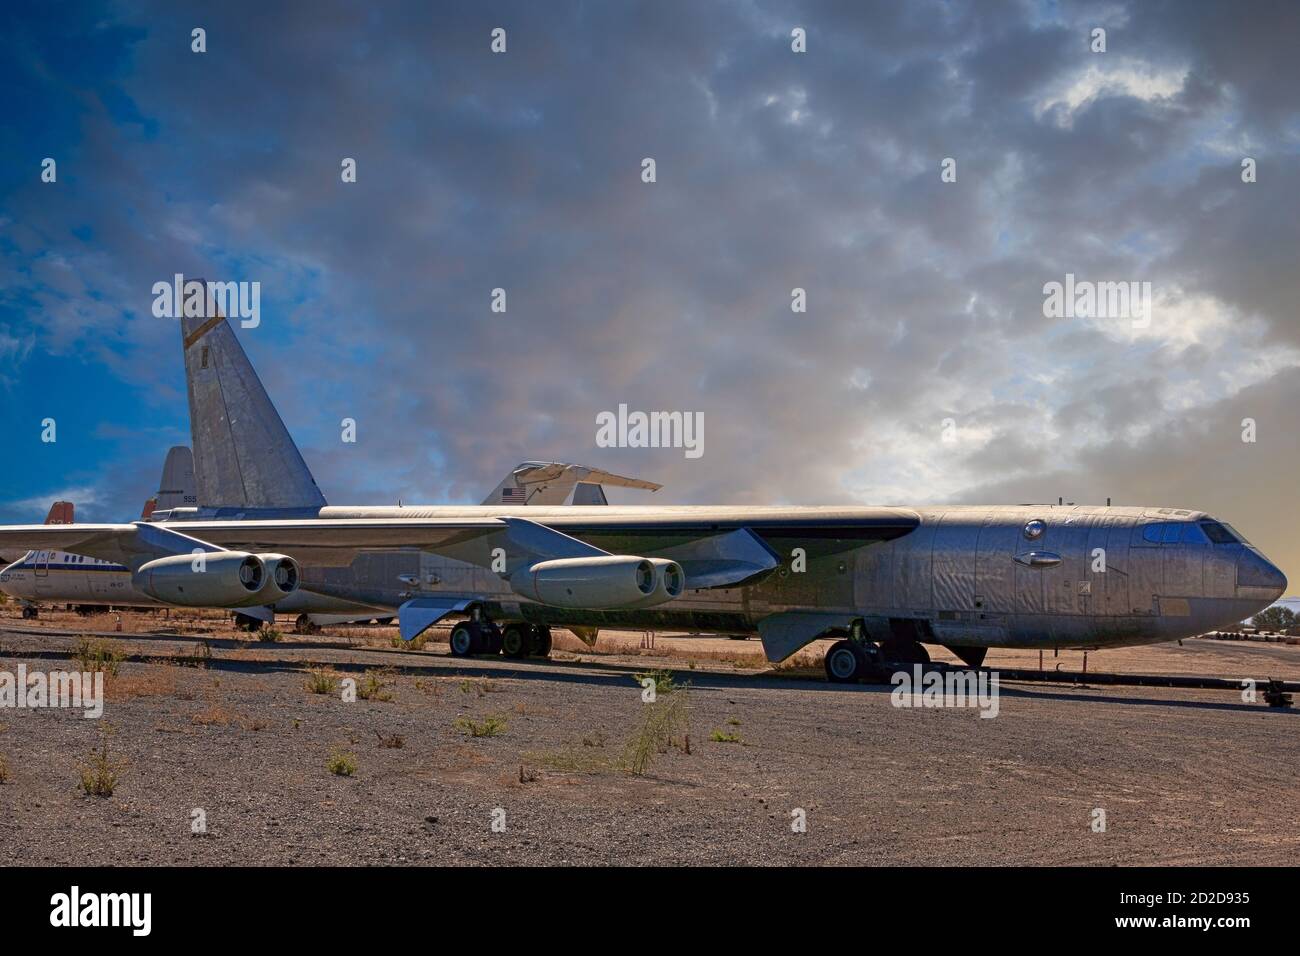 Very early model of a Boeing B52 Stratofortress at the boneyard in Tucson AZ Stock Photo